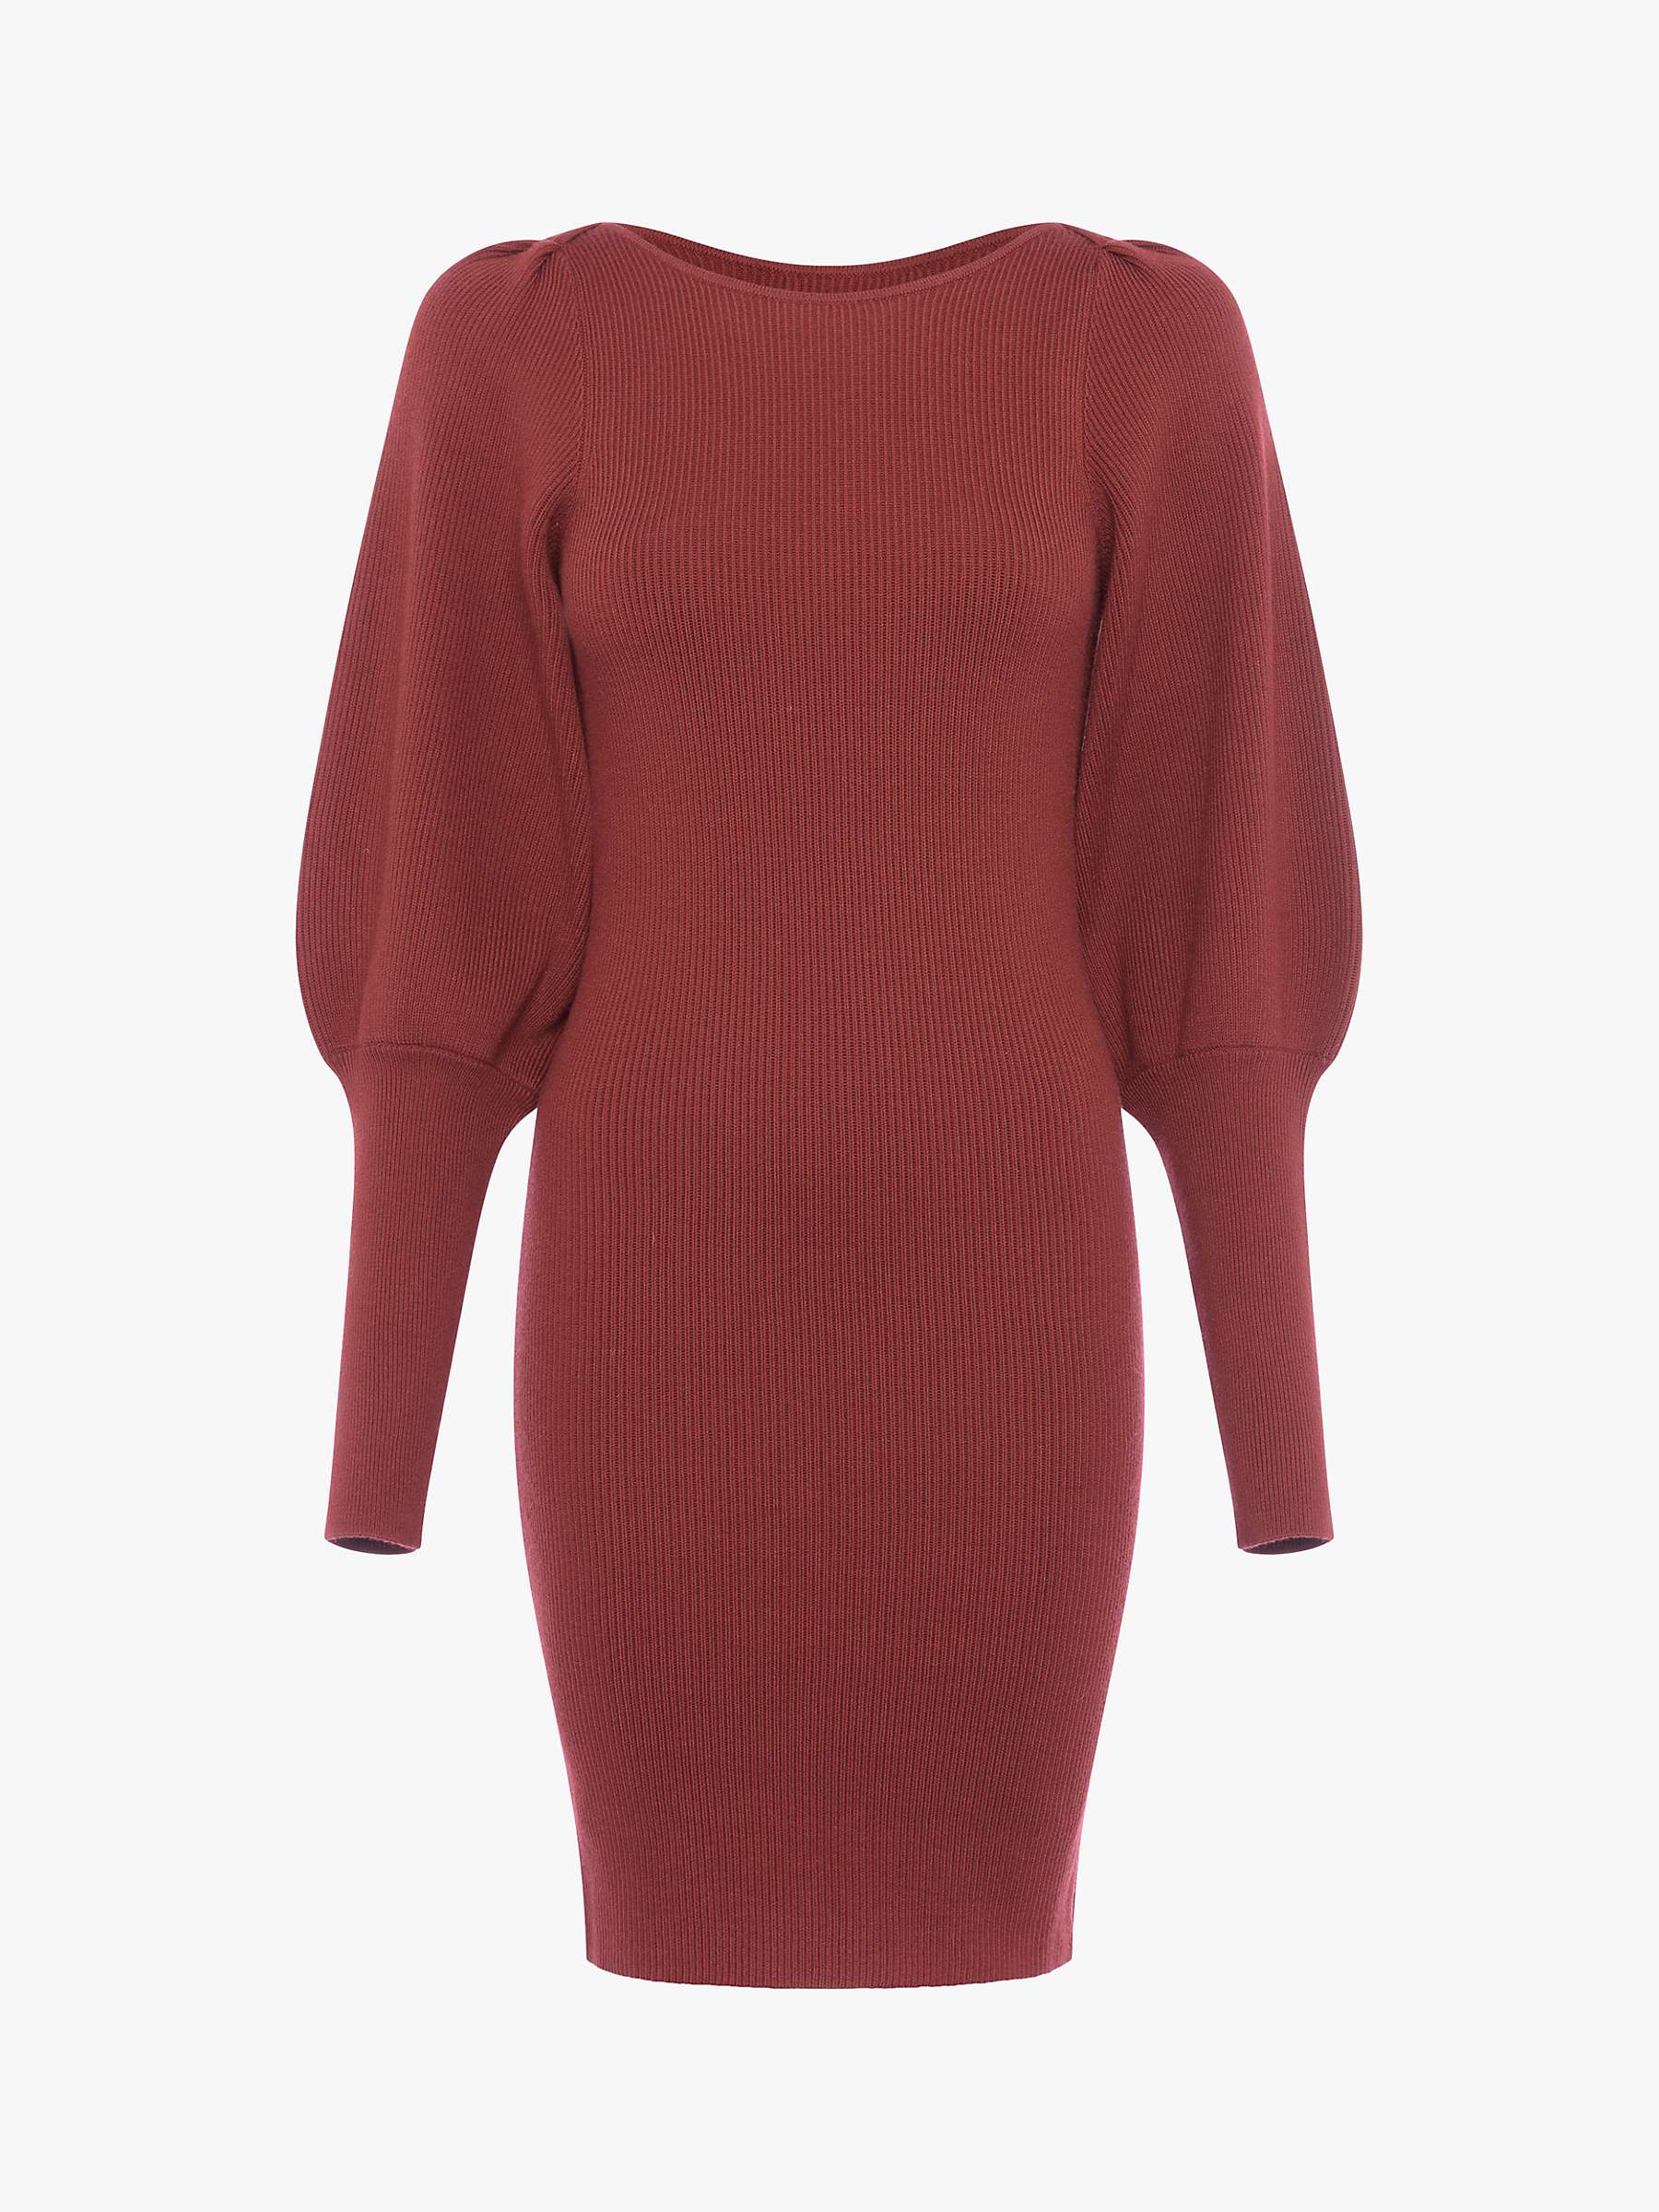 Buy French Connection Joss Balloon Sleeve Knit Dress Online at johnlewis.com